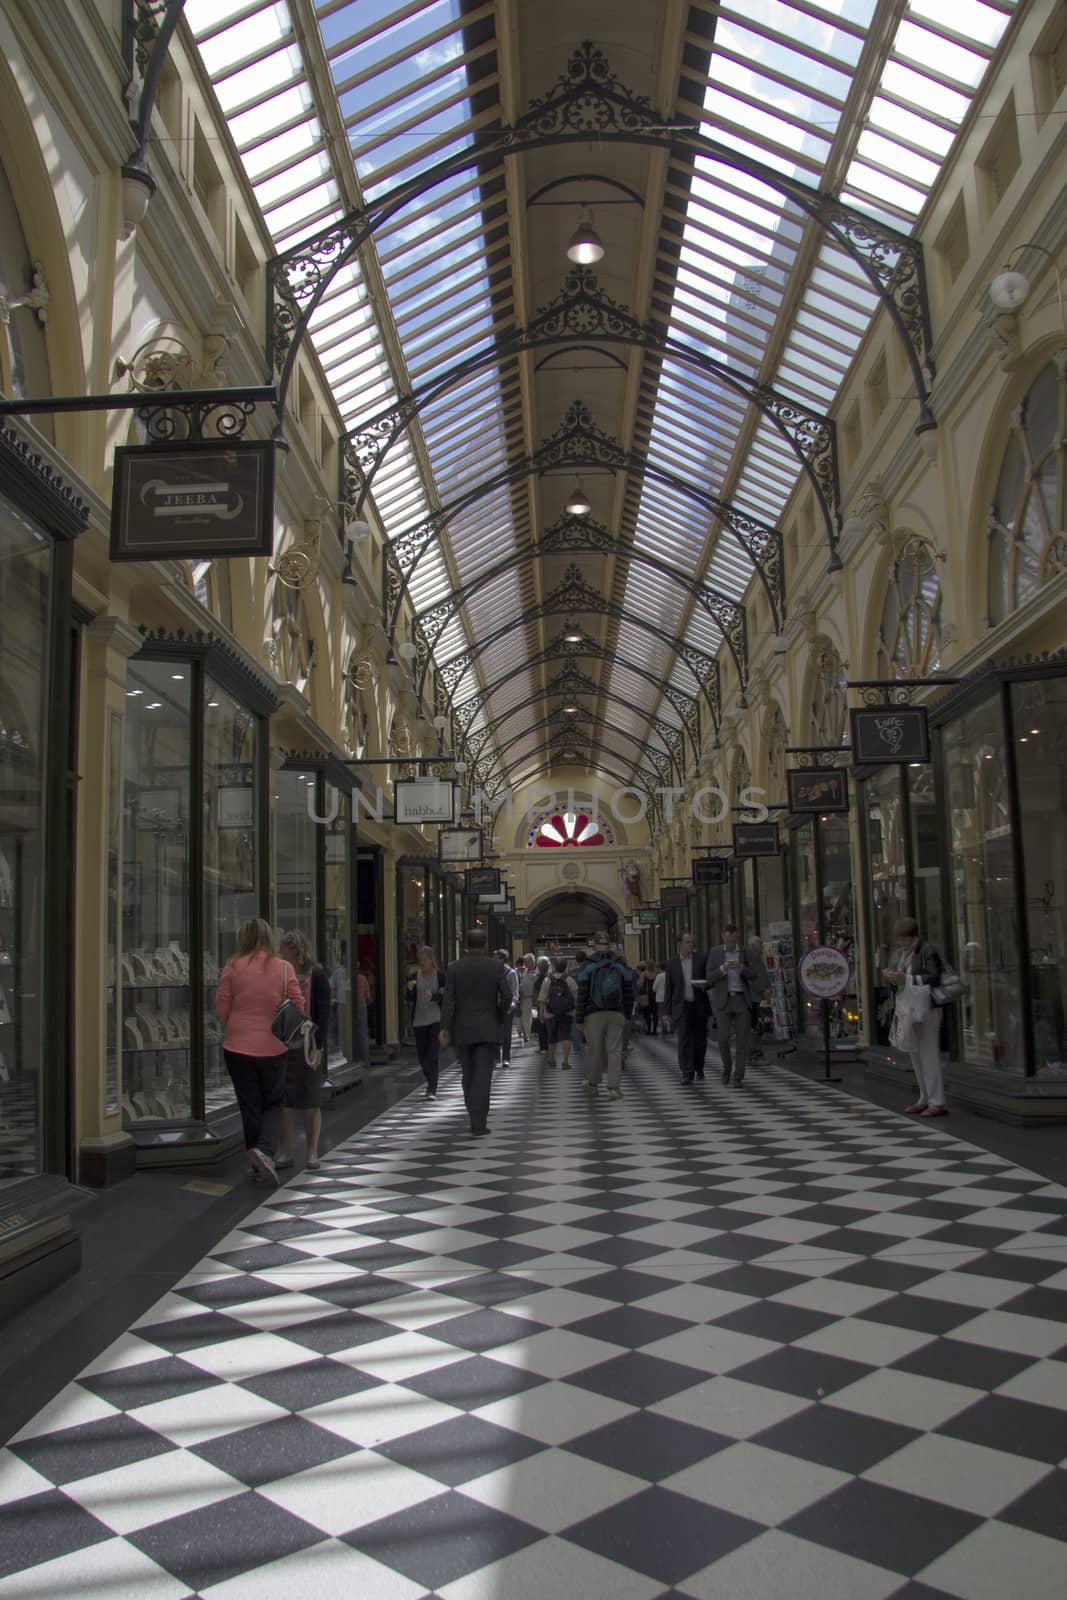 MELBOURNE, AUSTRALIA MAR 18TH: The Royal Arcade in Melbourne on March 18th 2013. Built in 1869, the arcade is listed in the Victorian Heritage Register.